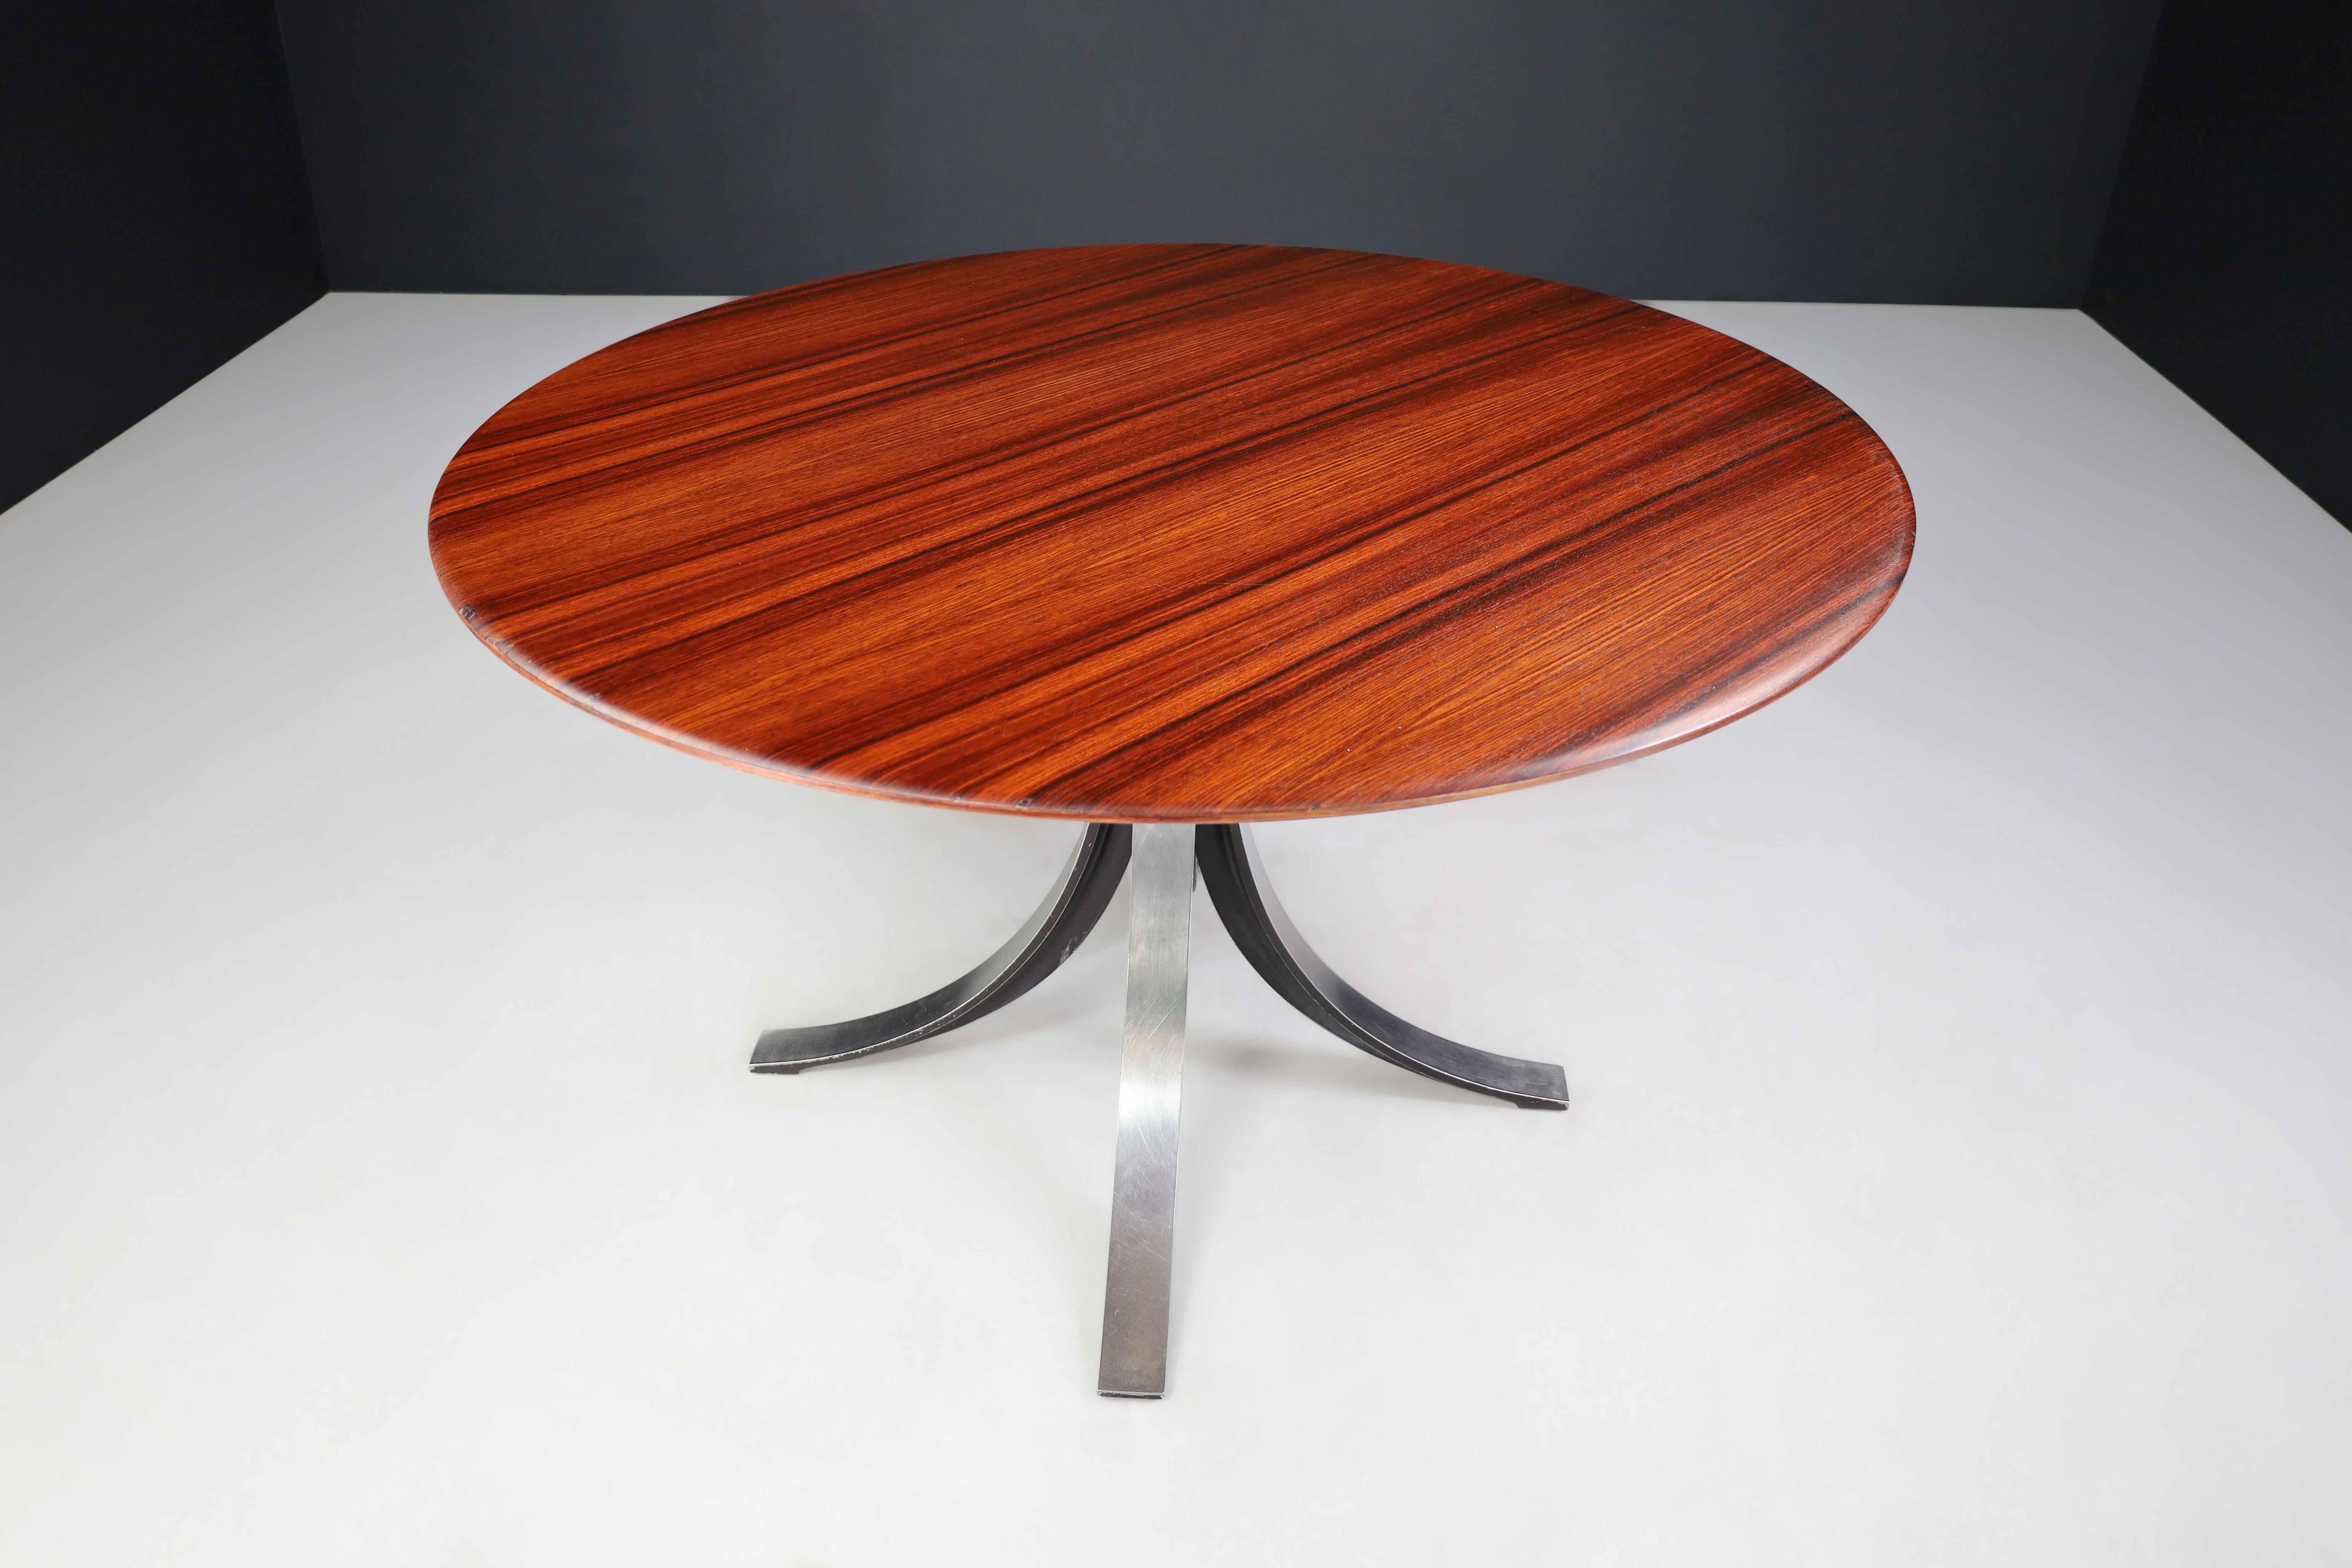 Osvaldo Borsani and Eugenio Gerli for Tecno round dining table in Walnut and Steel Italy, 1965.

This is a round dining table made from walnut and steel by Osvaldo Borsani and Eugenio Gerli for Tecno in Italy in 1965. The table's base is its most